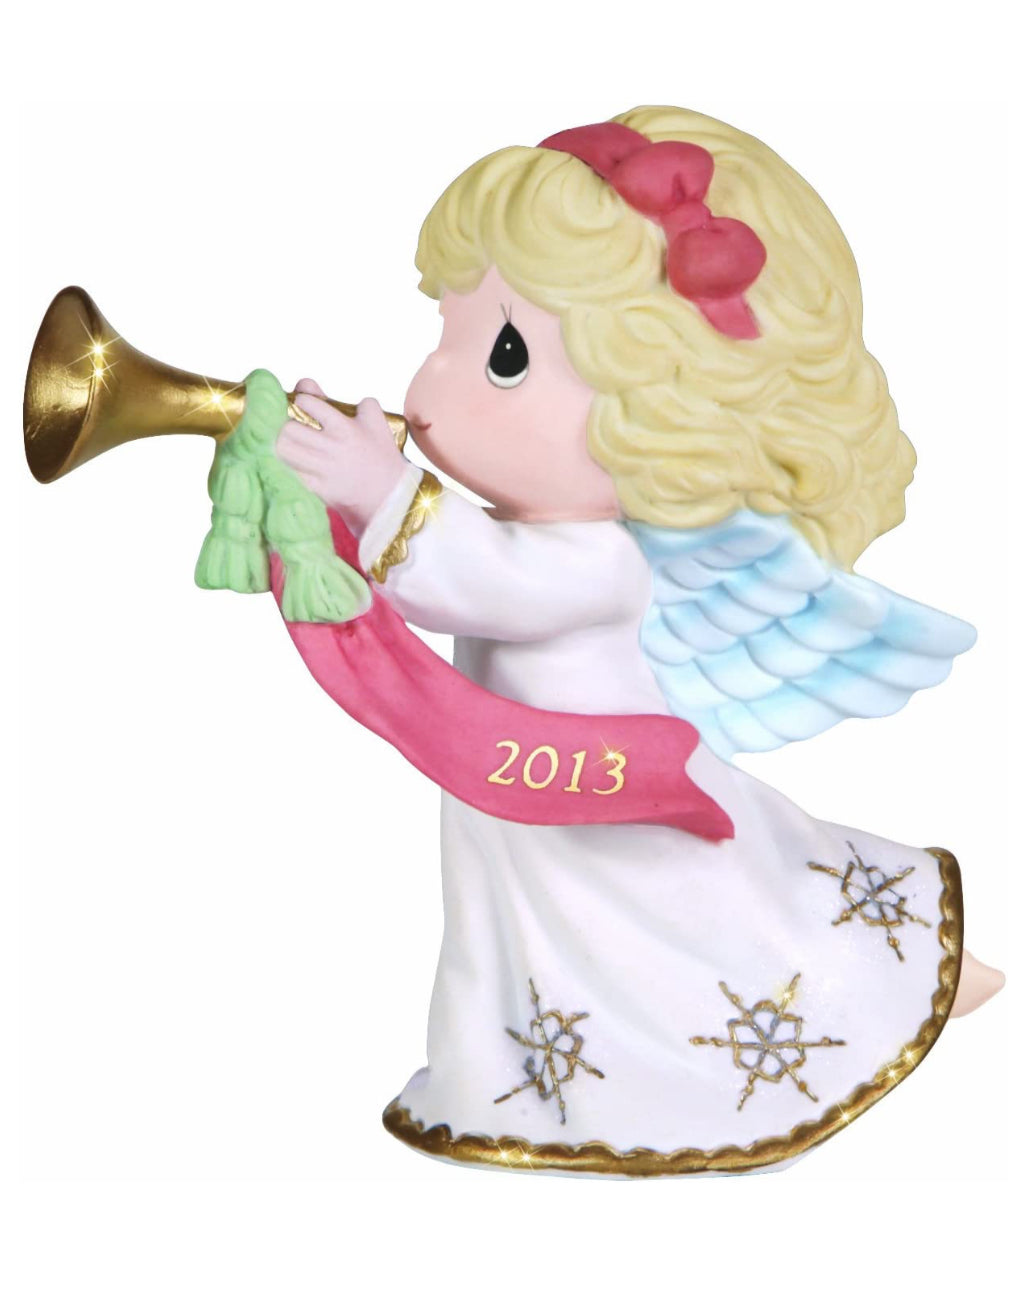 Peace On Earth And Goodwill To All - Dated Annual 2013 Precious Moment Figurine